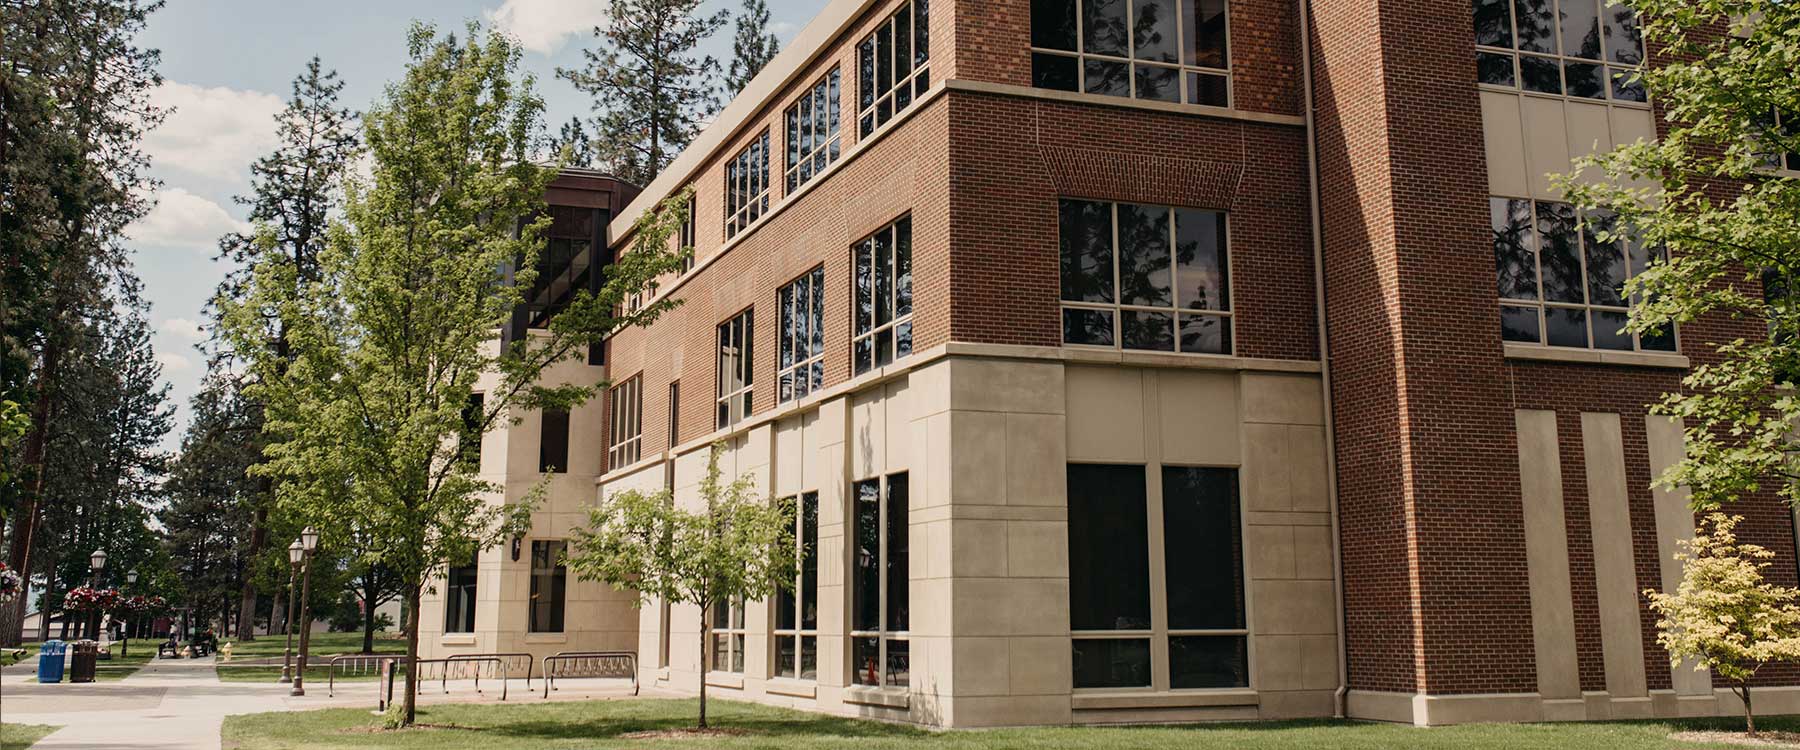 A west facing view of Weyerhaeuser Hall. The brick building is lined by trees, bike racks and the hello walk.